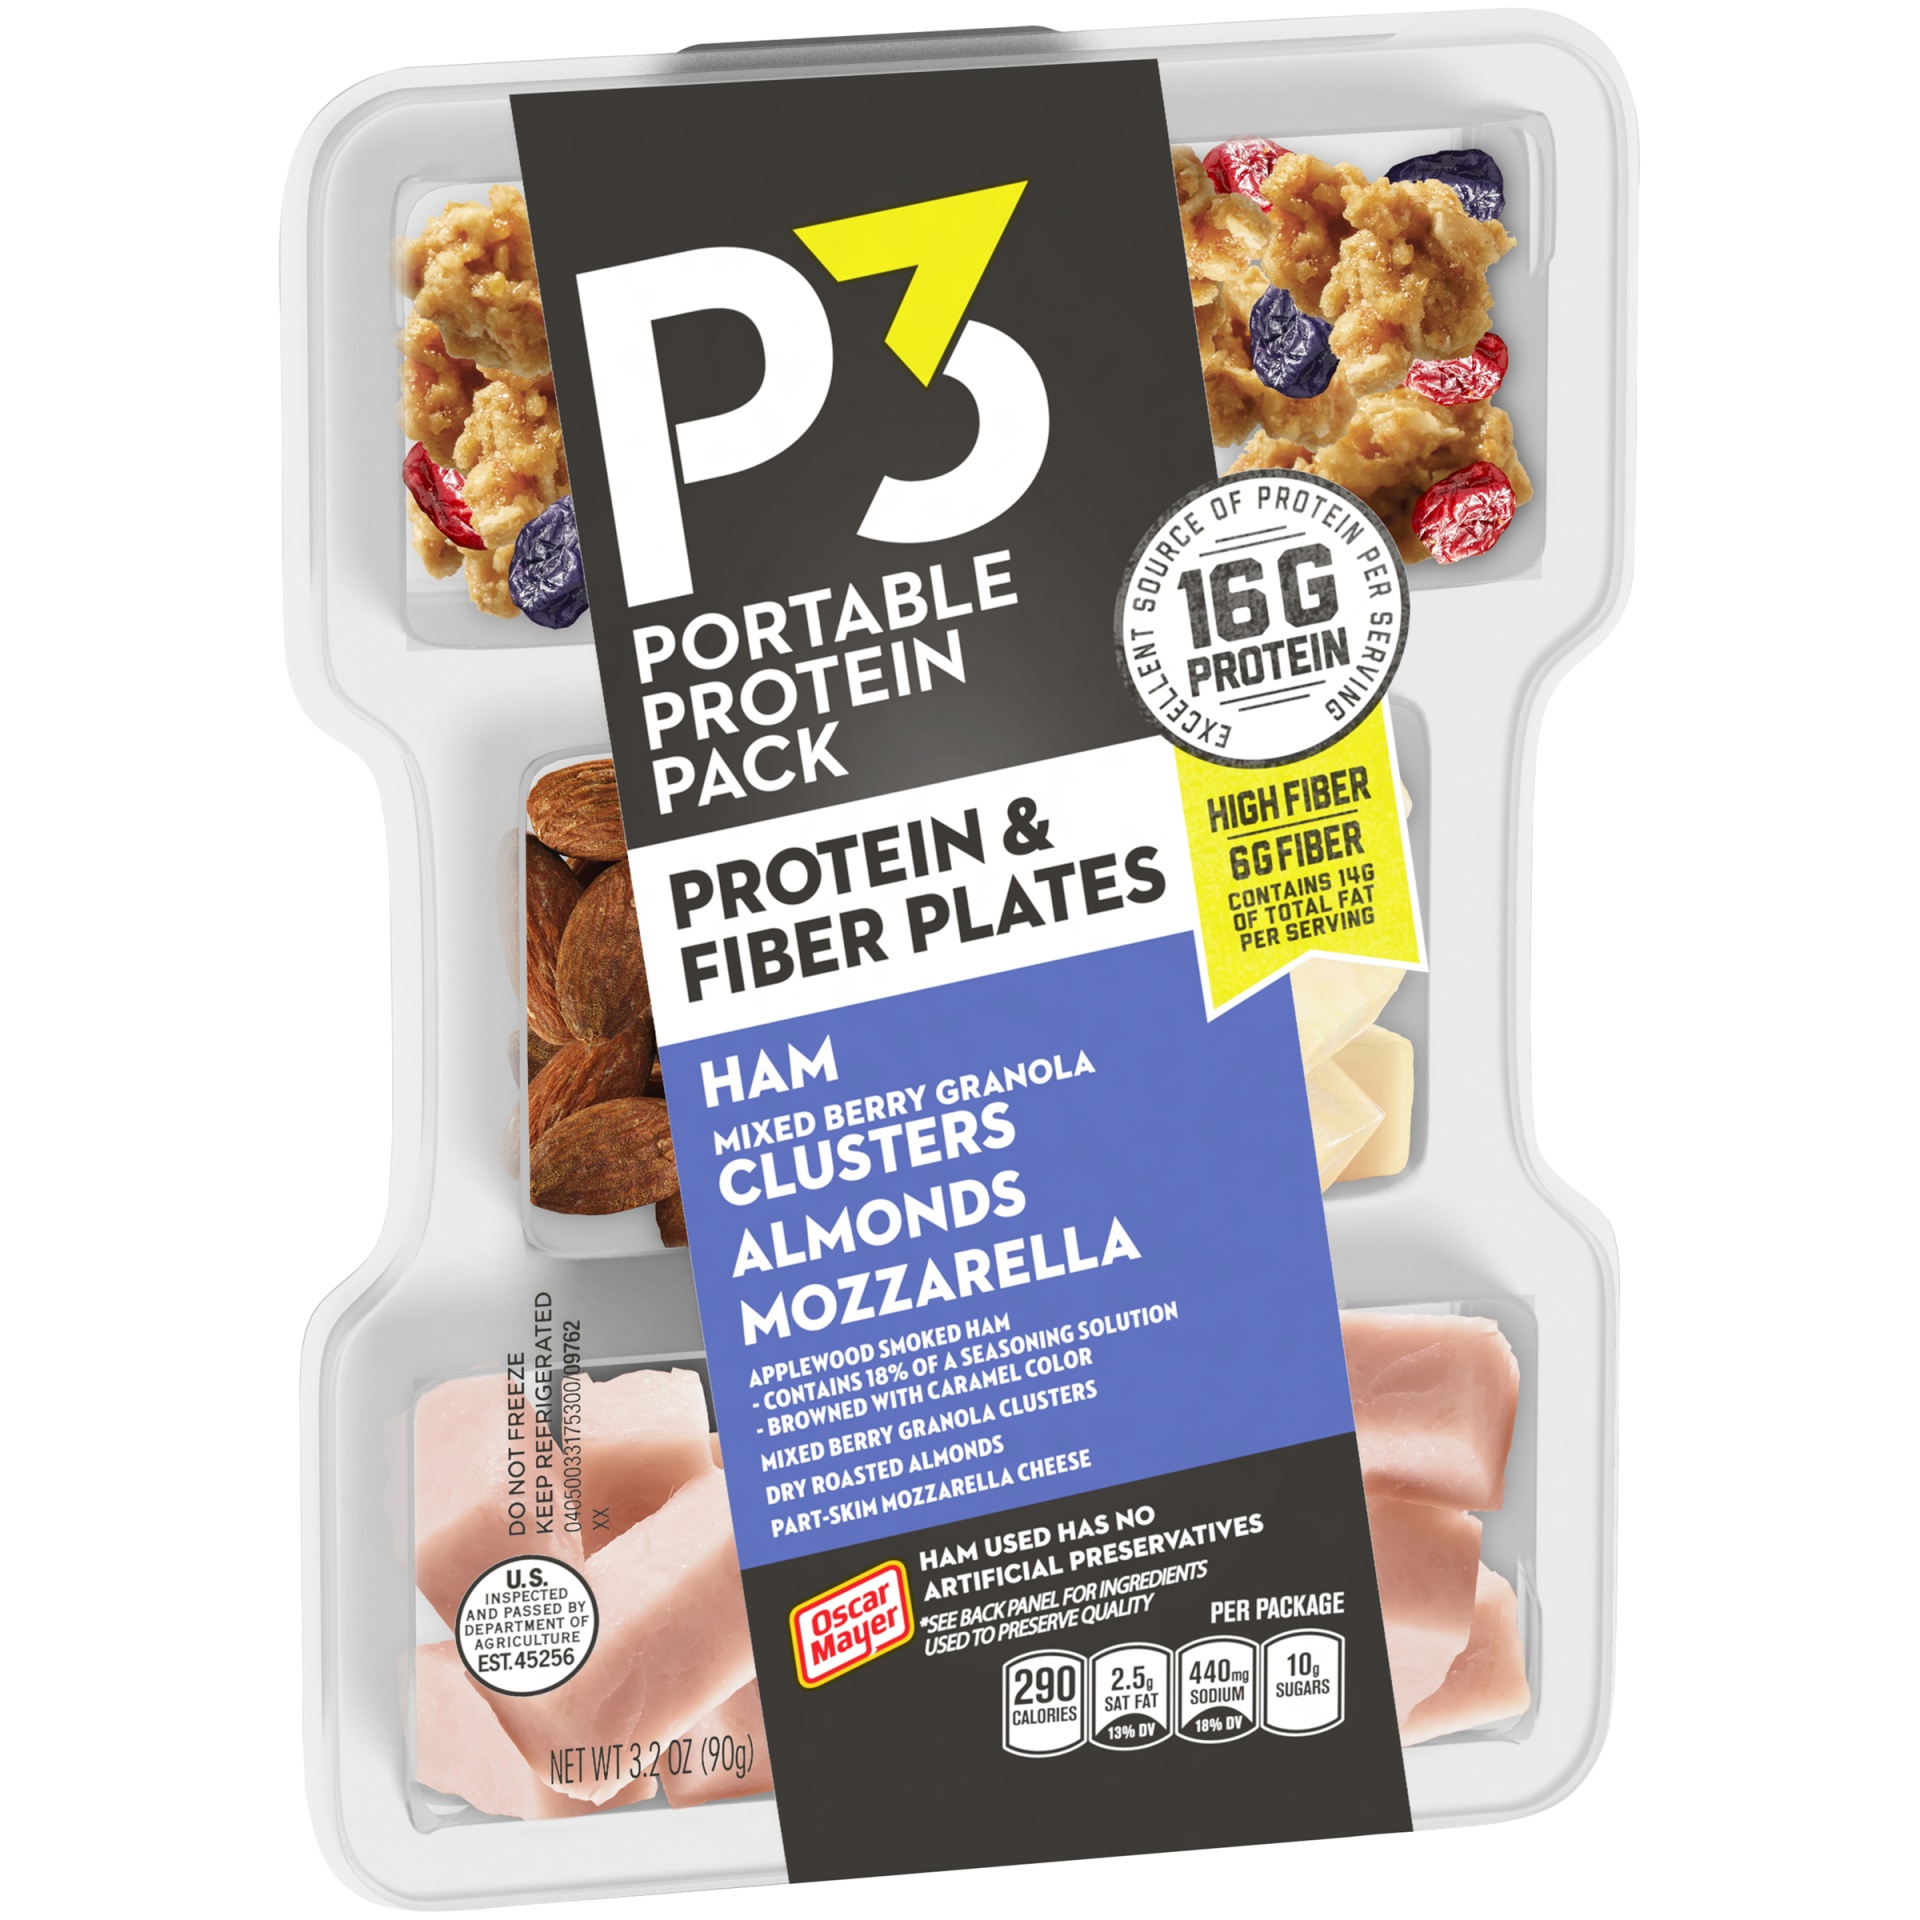 slide 2 of 6, P3 Portable Protein Snack Pack & Fiber Plate with Ham, Mixed Berry Granola Clusters, Almonds & Mozzarella Cheese Tray, 3.2 oz